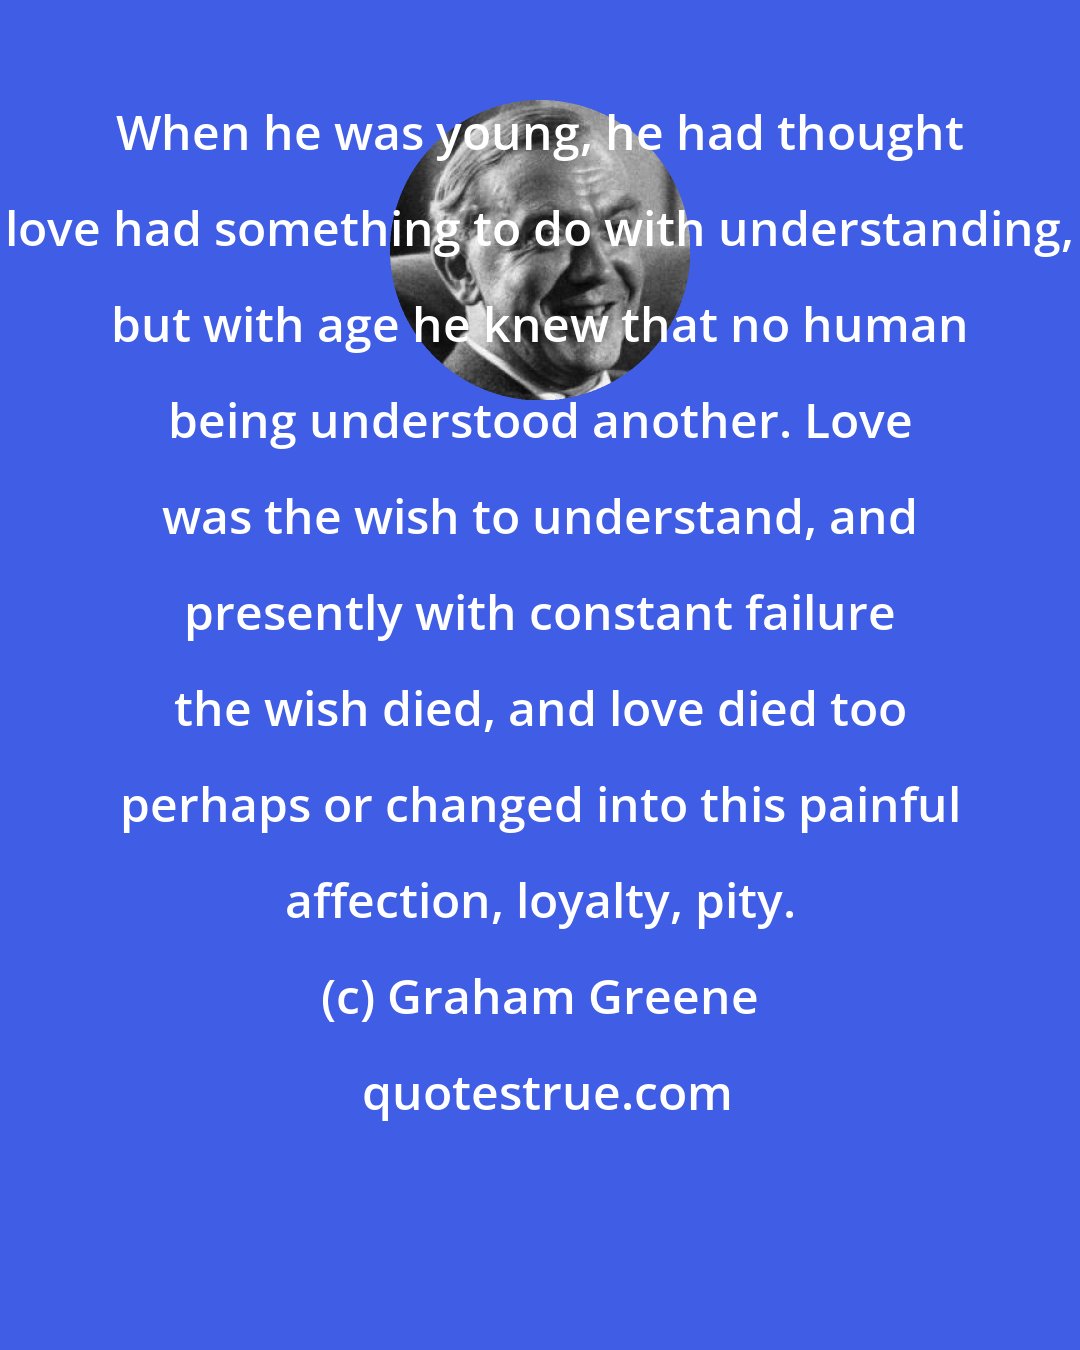 Graham Greene: When he was young, he had thought love had something to do with understanding, but with age he knew that no human being understood another. Love was the wish to understand, and presently with constant failure the wish died, and love died too perhaps or changed into this painful affection, loyalty, pity.